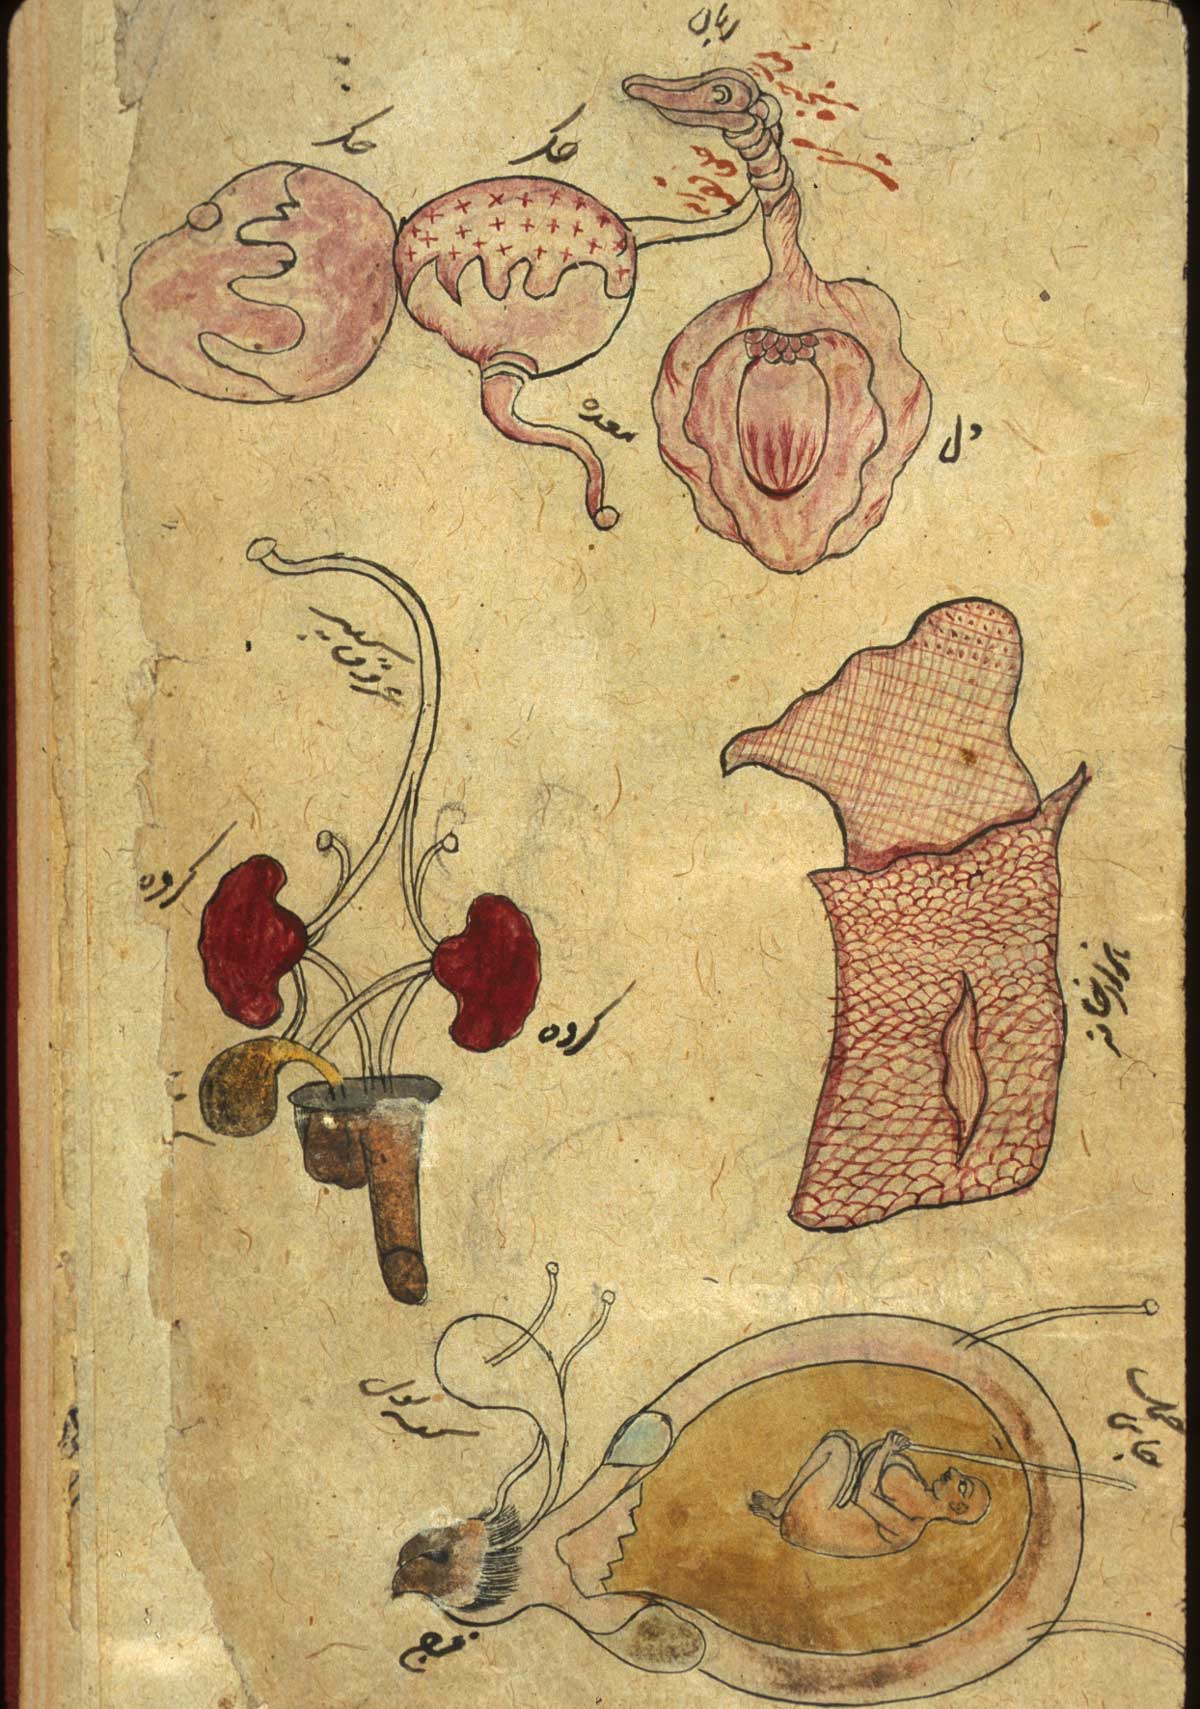 Drawings of individual organs, in inks and opaque watercolors. Illustrated are [at top] a composite rendering of the tongue, larynx, heart, trachea, stomach, and liver; [left] a composite drawing of the ureters, urethra, kidneys, testicles, and penis; [right] the external female genitalia; and [at bottom] a composite rendering of the internal female genitalia with a gravid uterus. Undated and unsigned, probably 18th century, India, from NLM MS P 20.